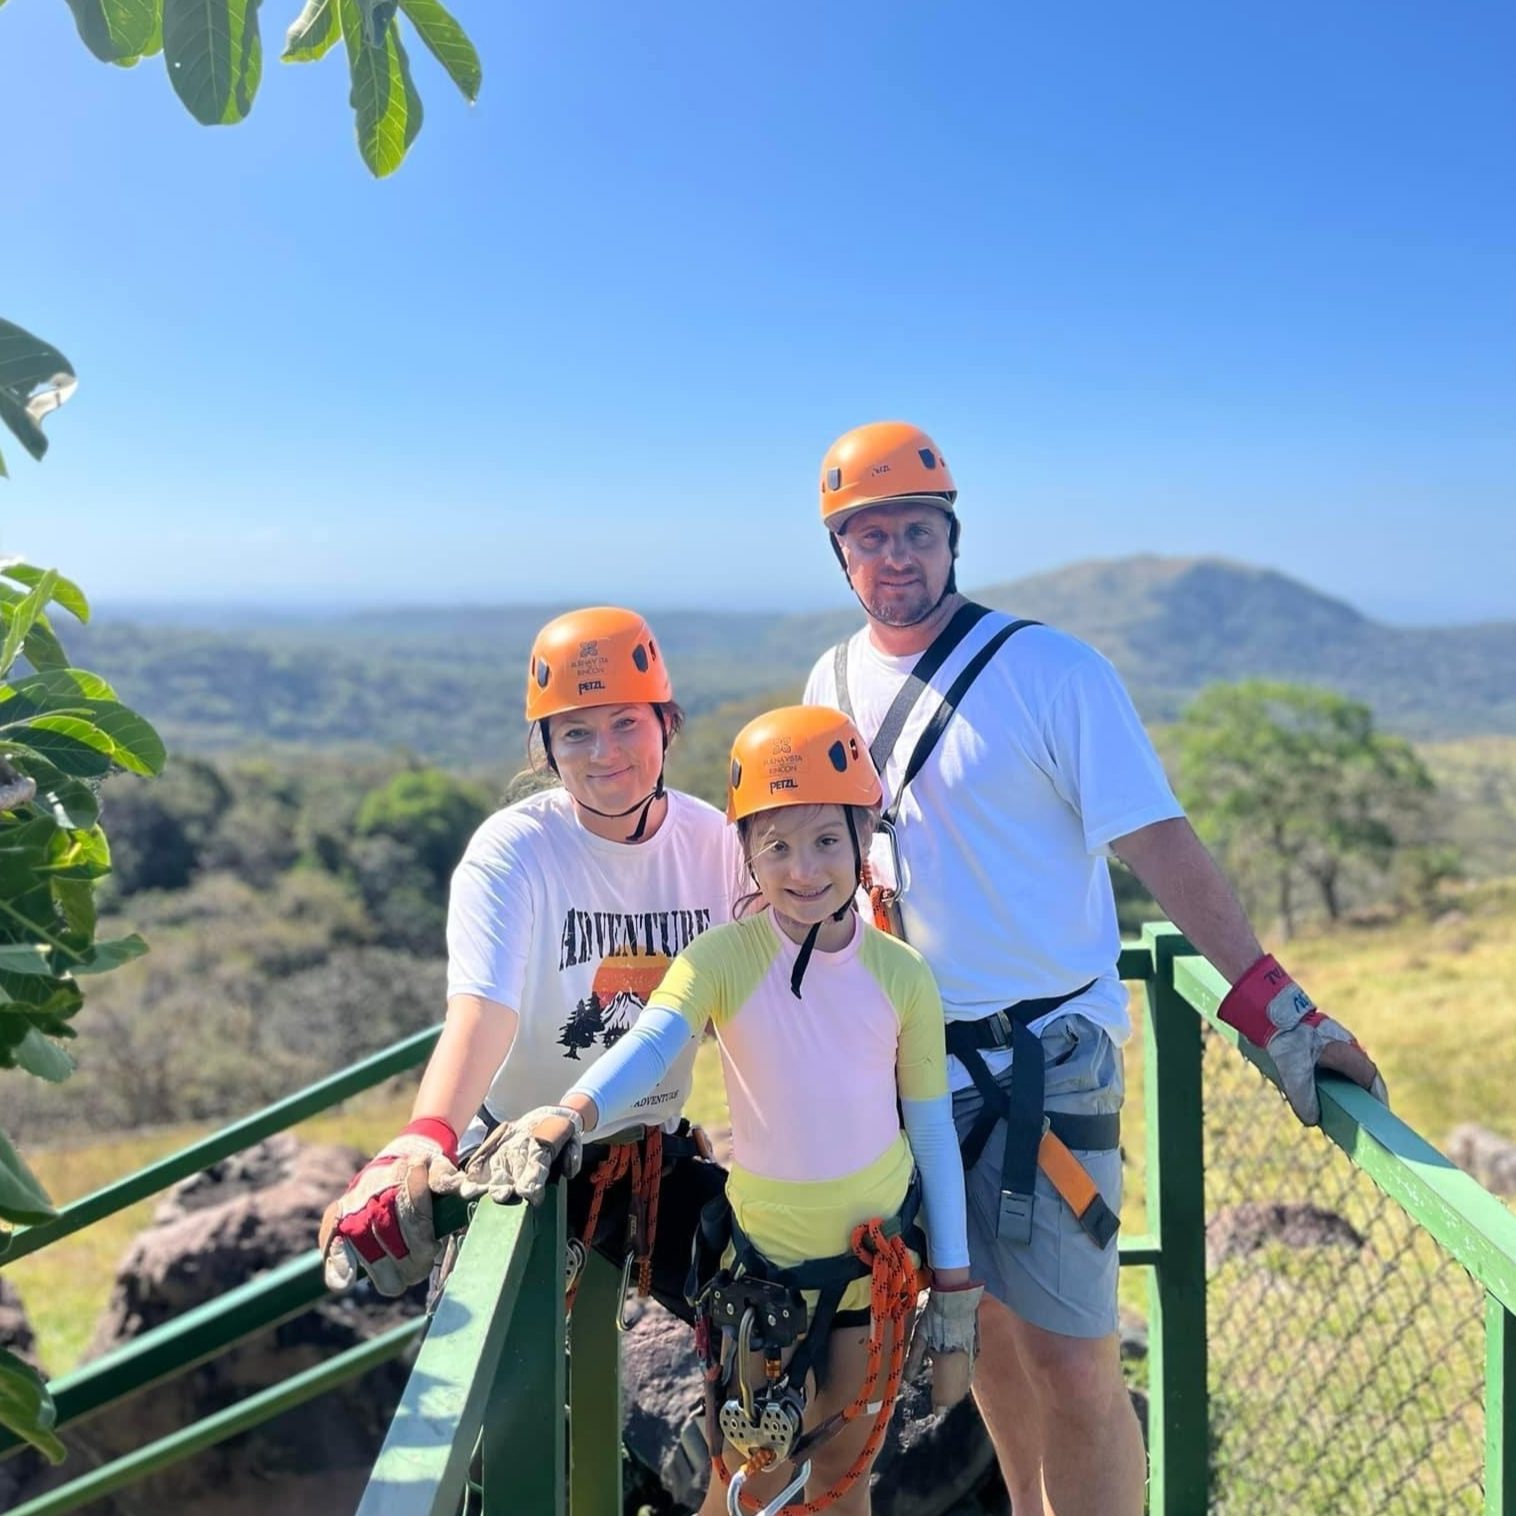 A family dressed in outdoor adventure gear with helmets and harnesses, ready for a thrilling zipline experience in Costa Rica, boasting lush greenery and rolling hills perfect for kids.